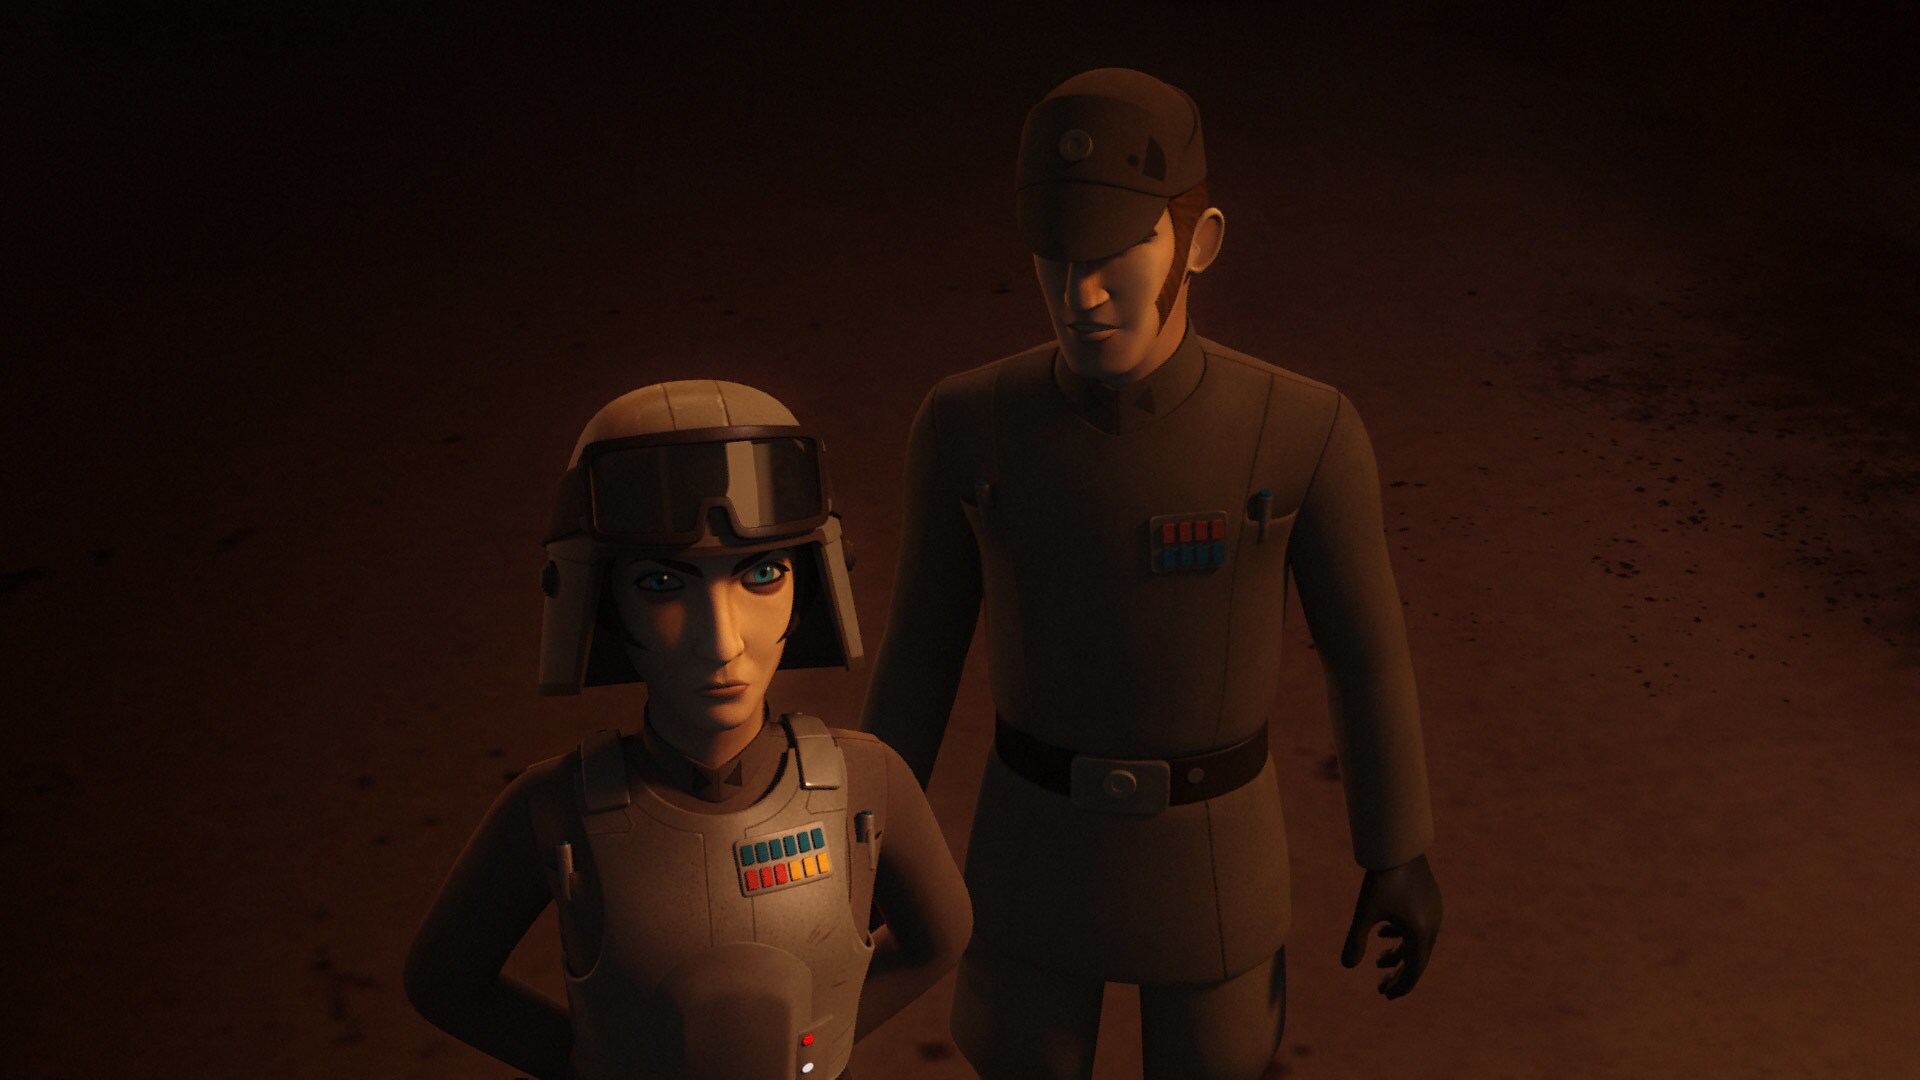 Governor Pryce is informed that Kanan Jarrus has been killed. But with the destruction of the fue...